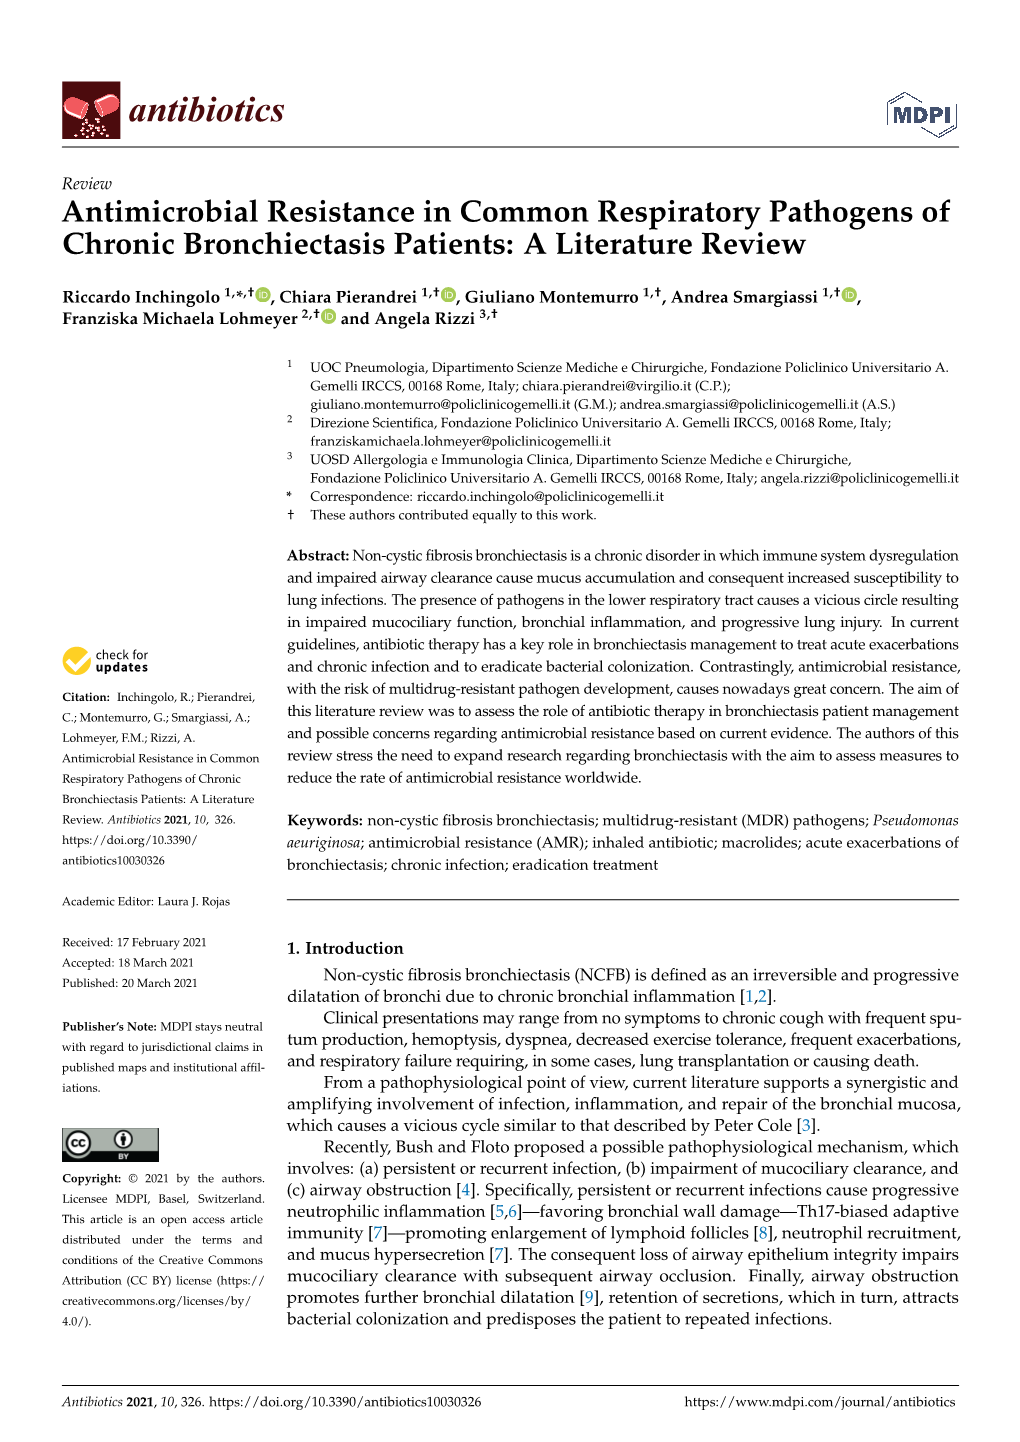 Antimicrobial Resistance in Common Respiratory Pathogens of Chronic Bronchiectasis Patients: a Literature Review